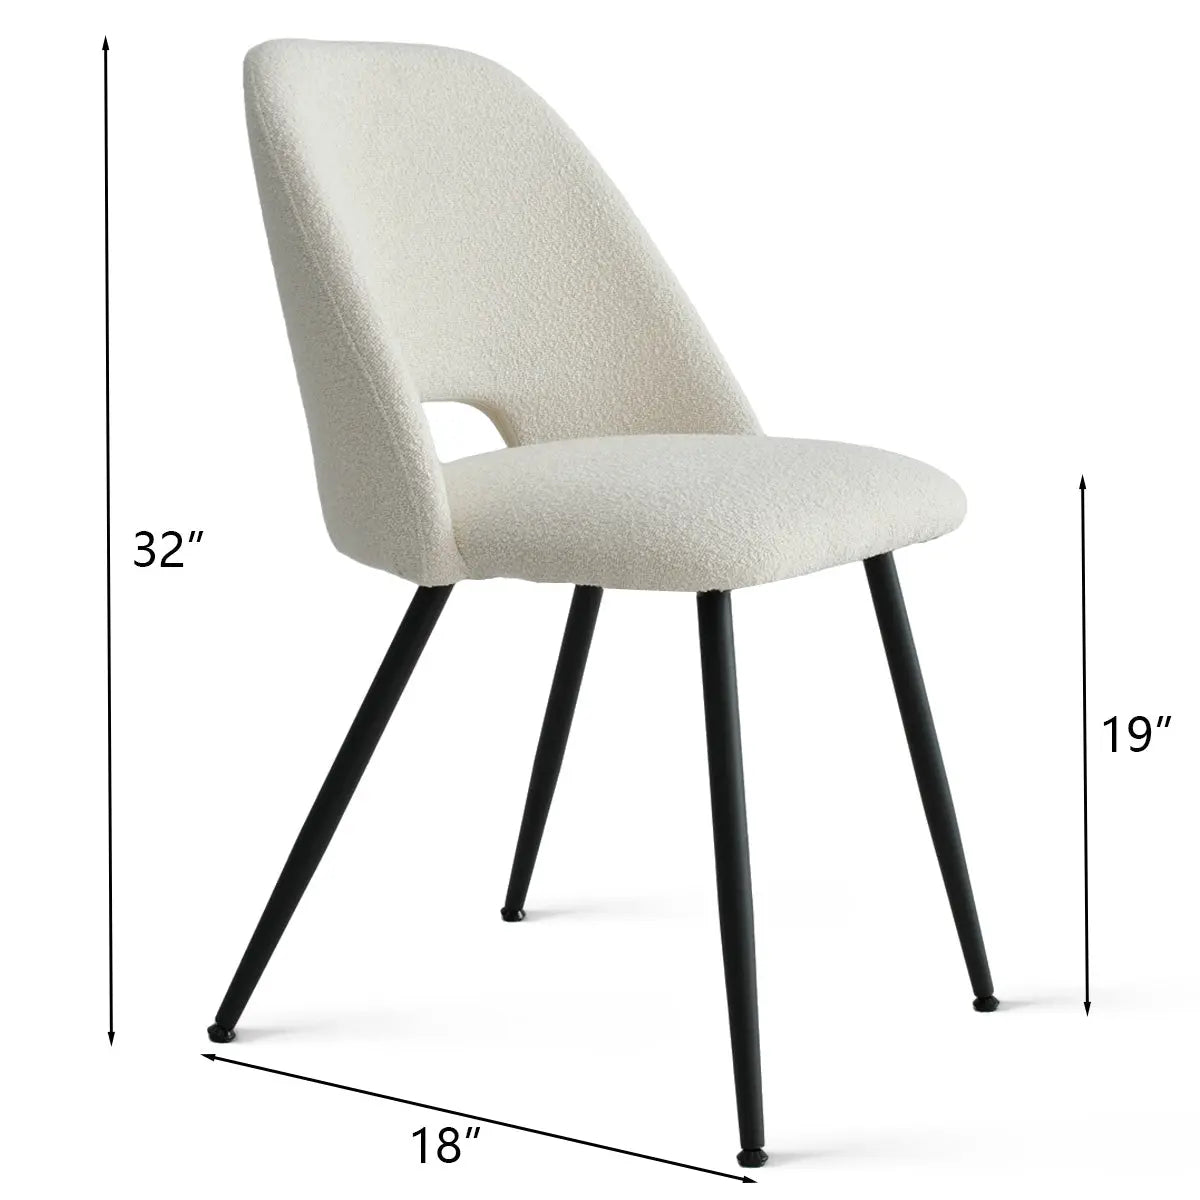 Set of 4 Edwin Beige Upholstered Dining Chair-The Pop Maison